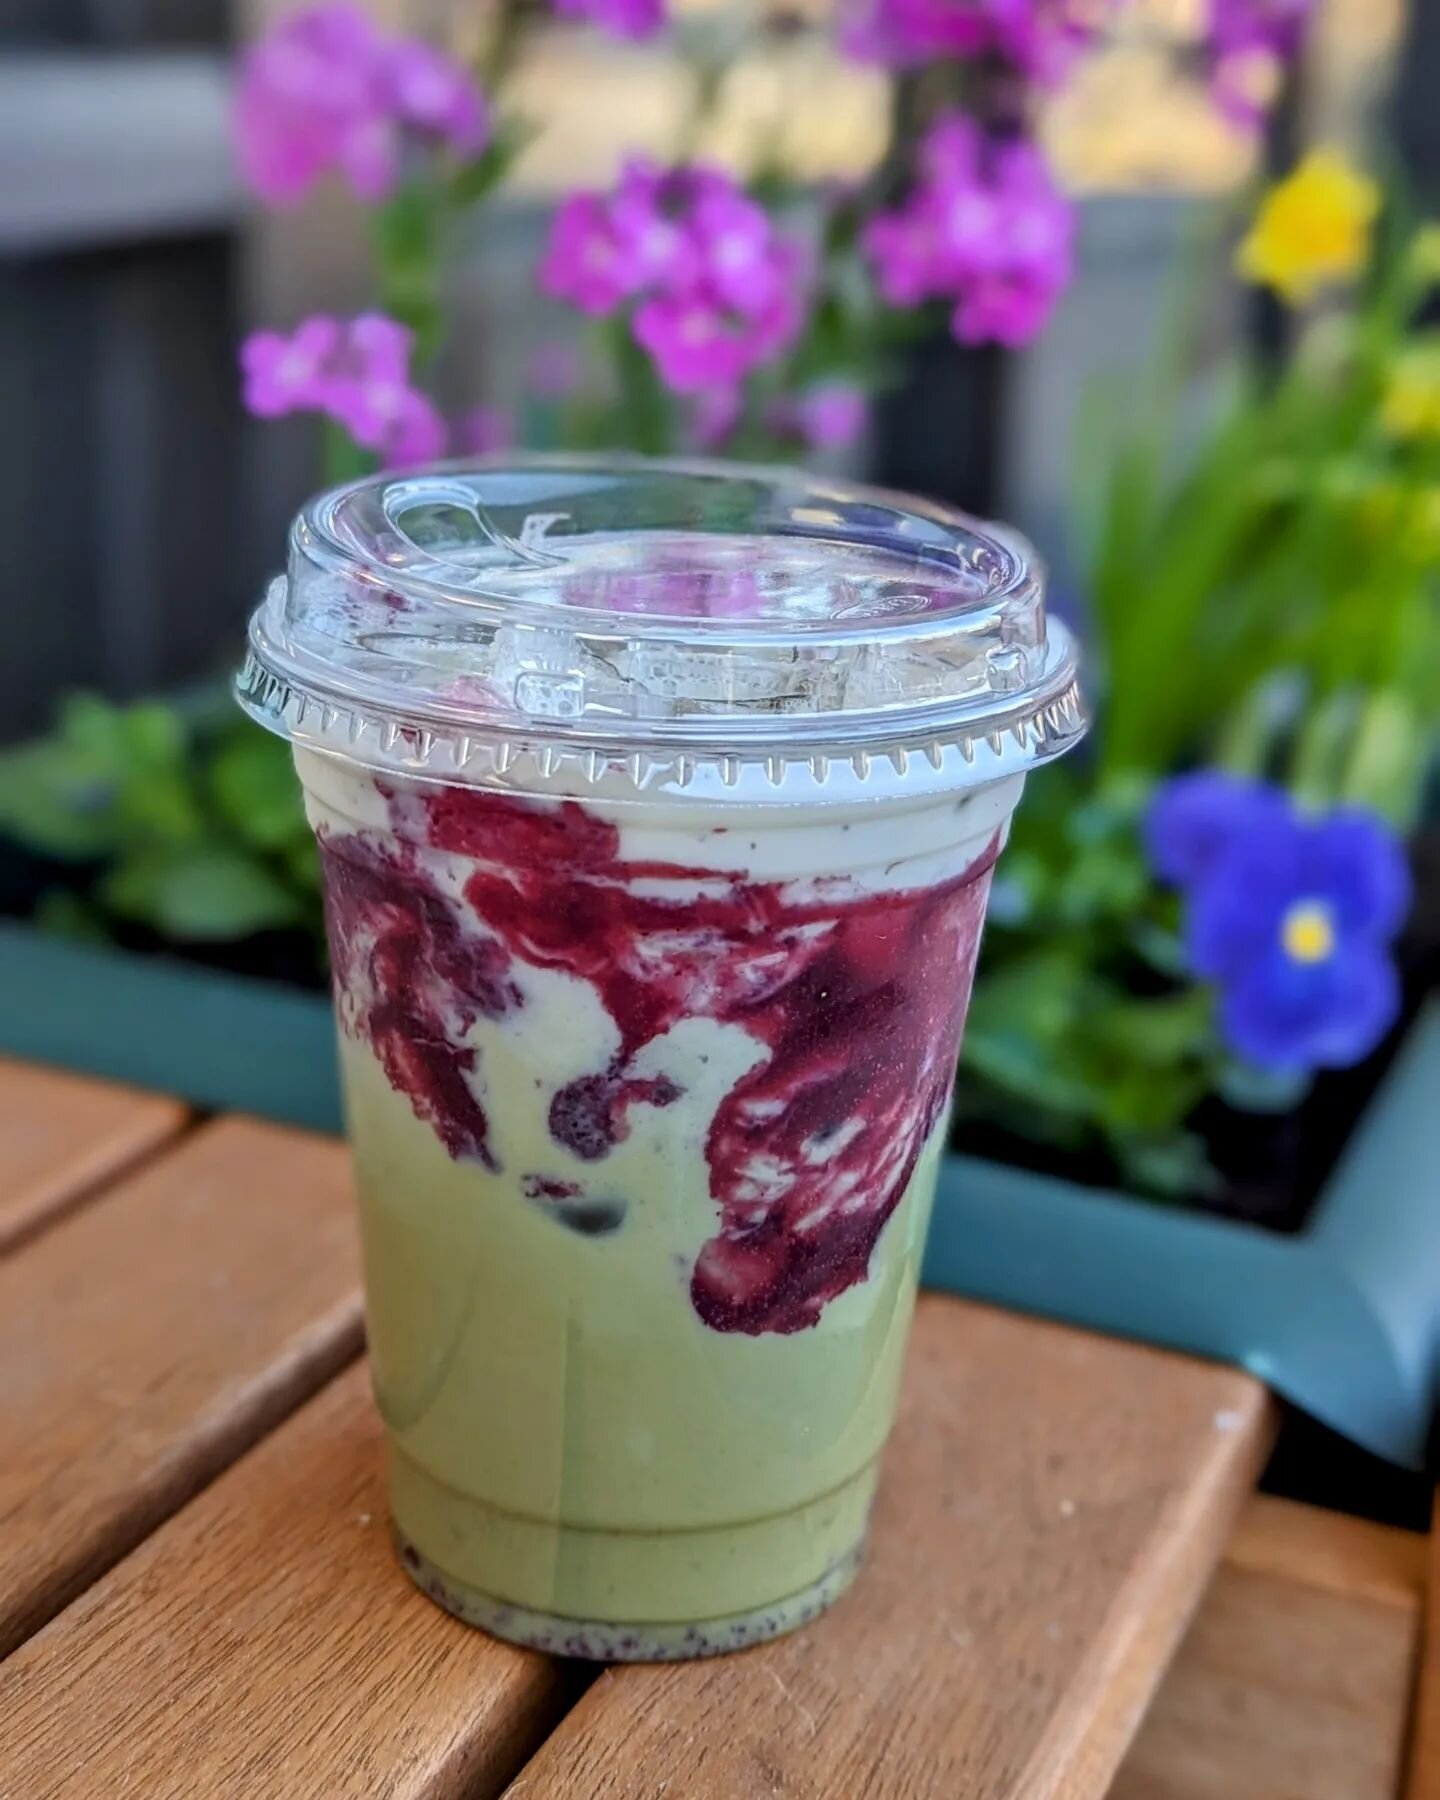 Good morning lads and lasses! We've rolled out our spring seasonal drink menu. Enjoy a marionberry matcha latte, with homemade marionberry syrup, and a white chocolate peppermint shamrock mocha. We still have our lavender London fog, hazelnut mocha, 